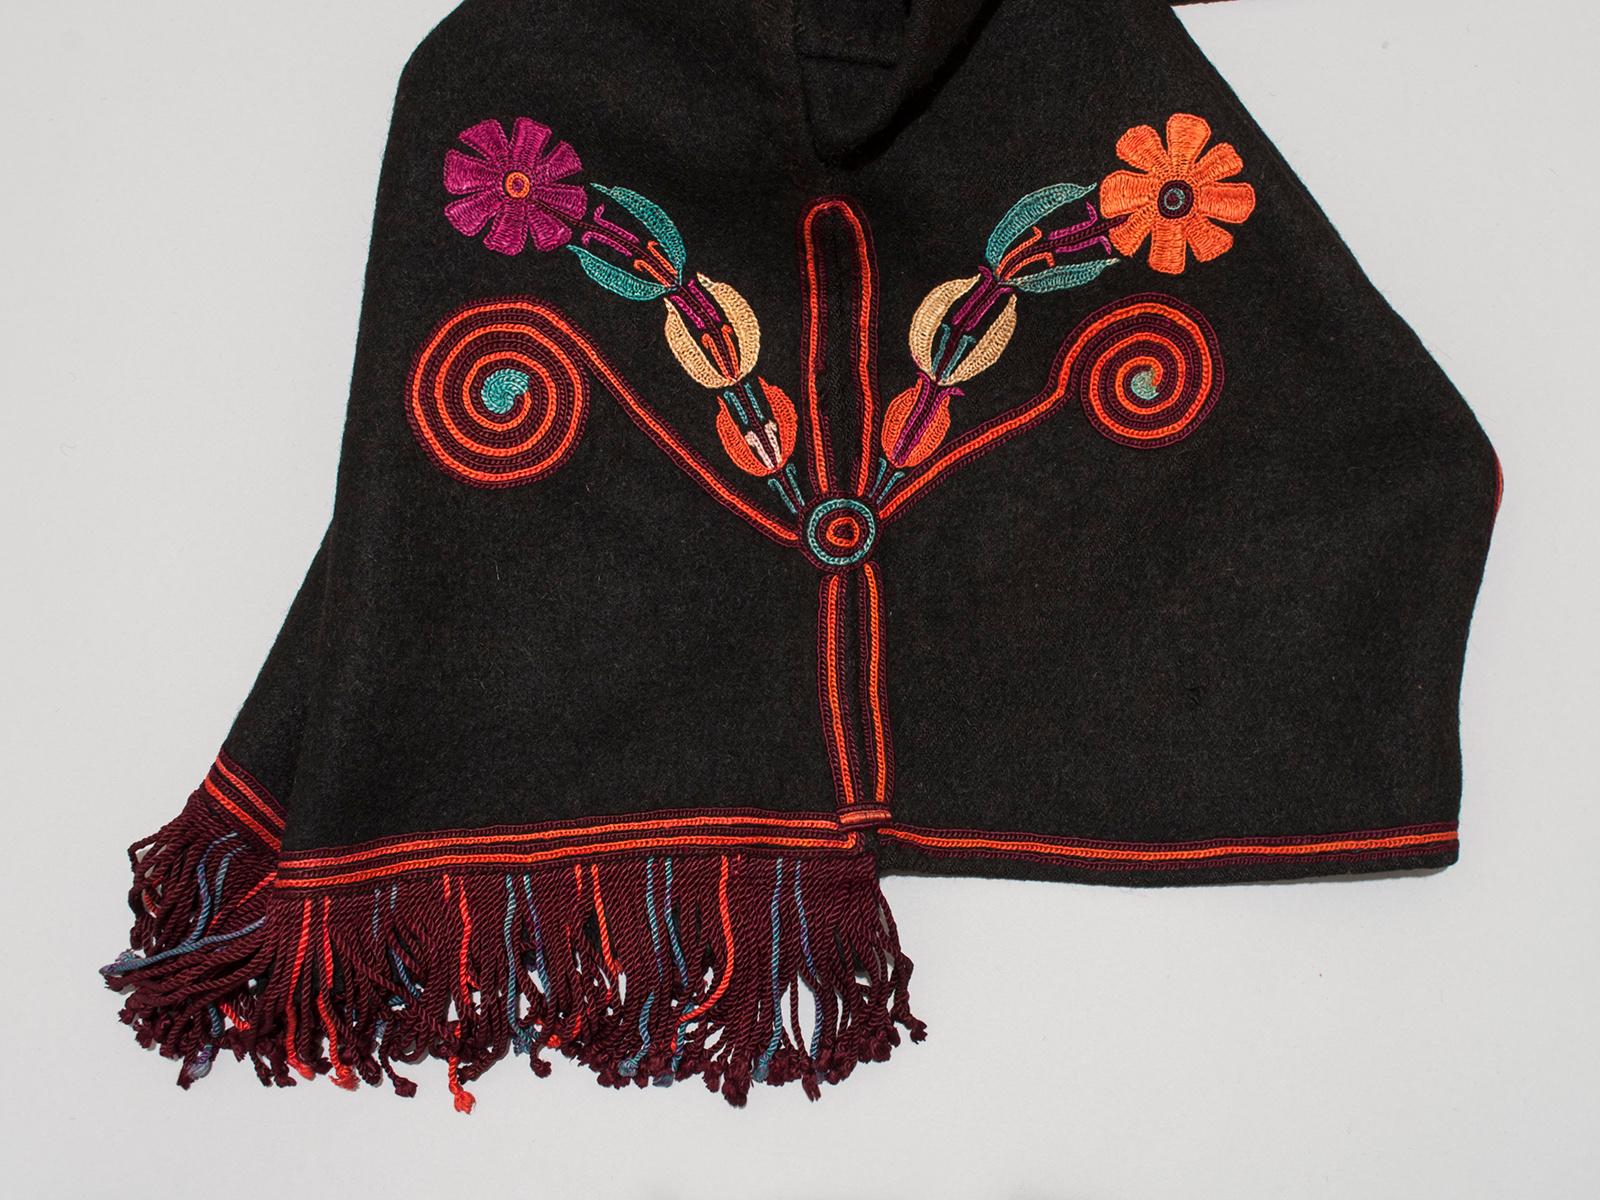 Wool Mid-20th Century Man's Ceremonial (cofradía) Outfit, Chichicastenango, Guatemala For Sale